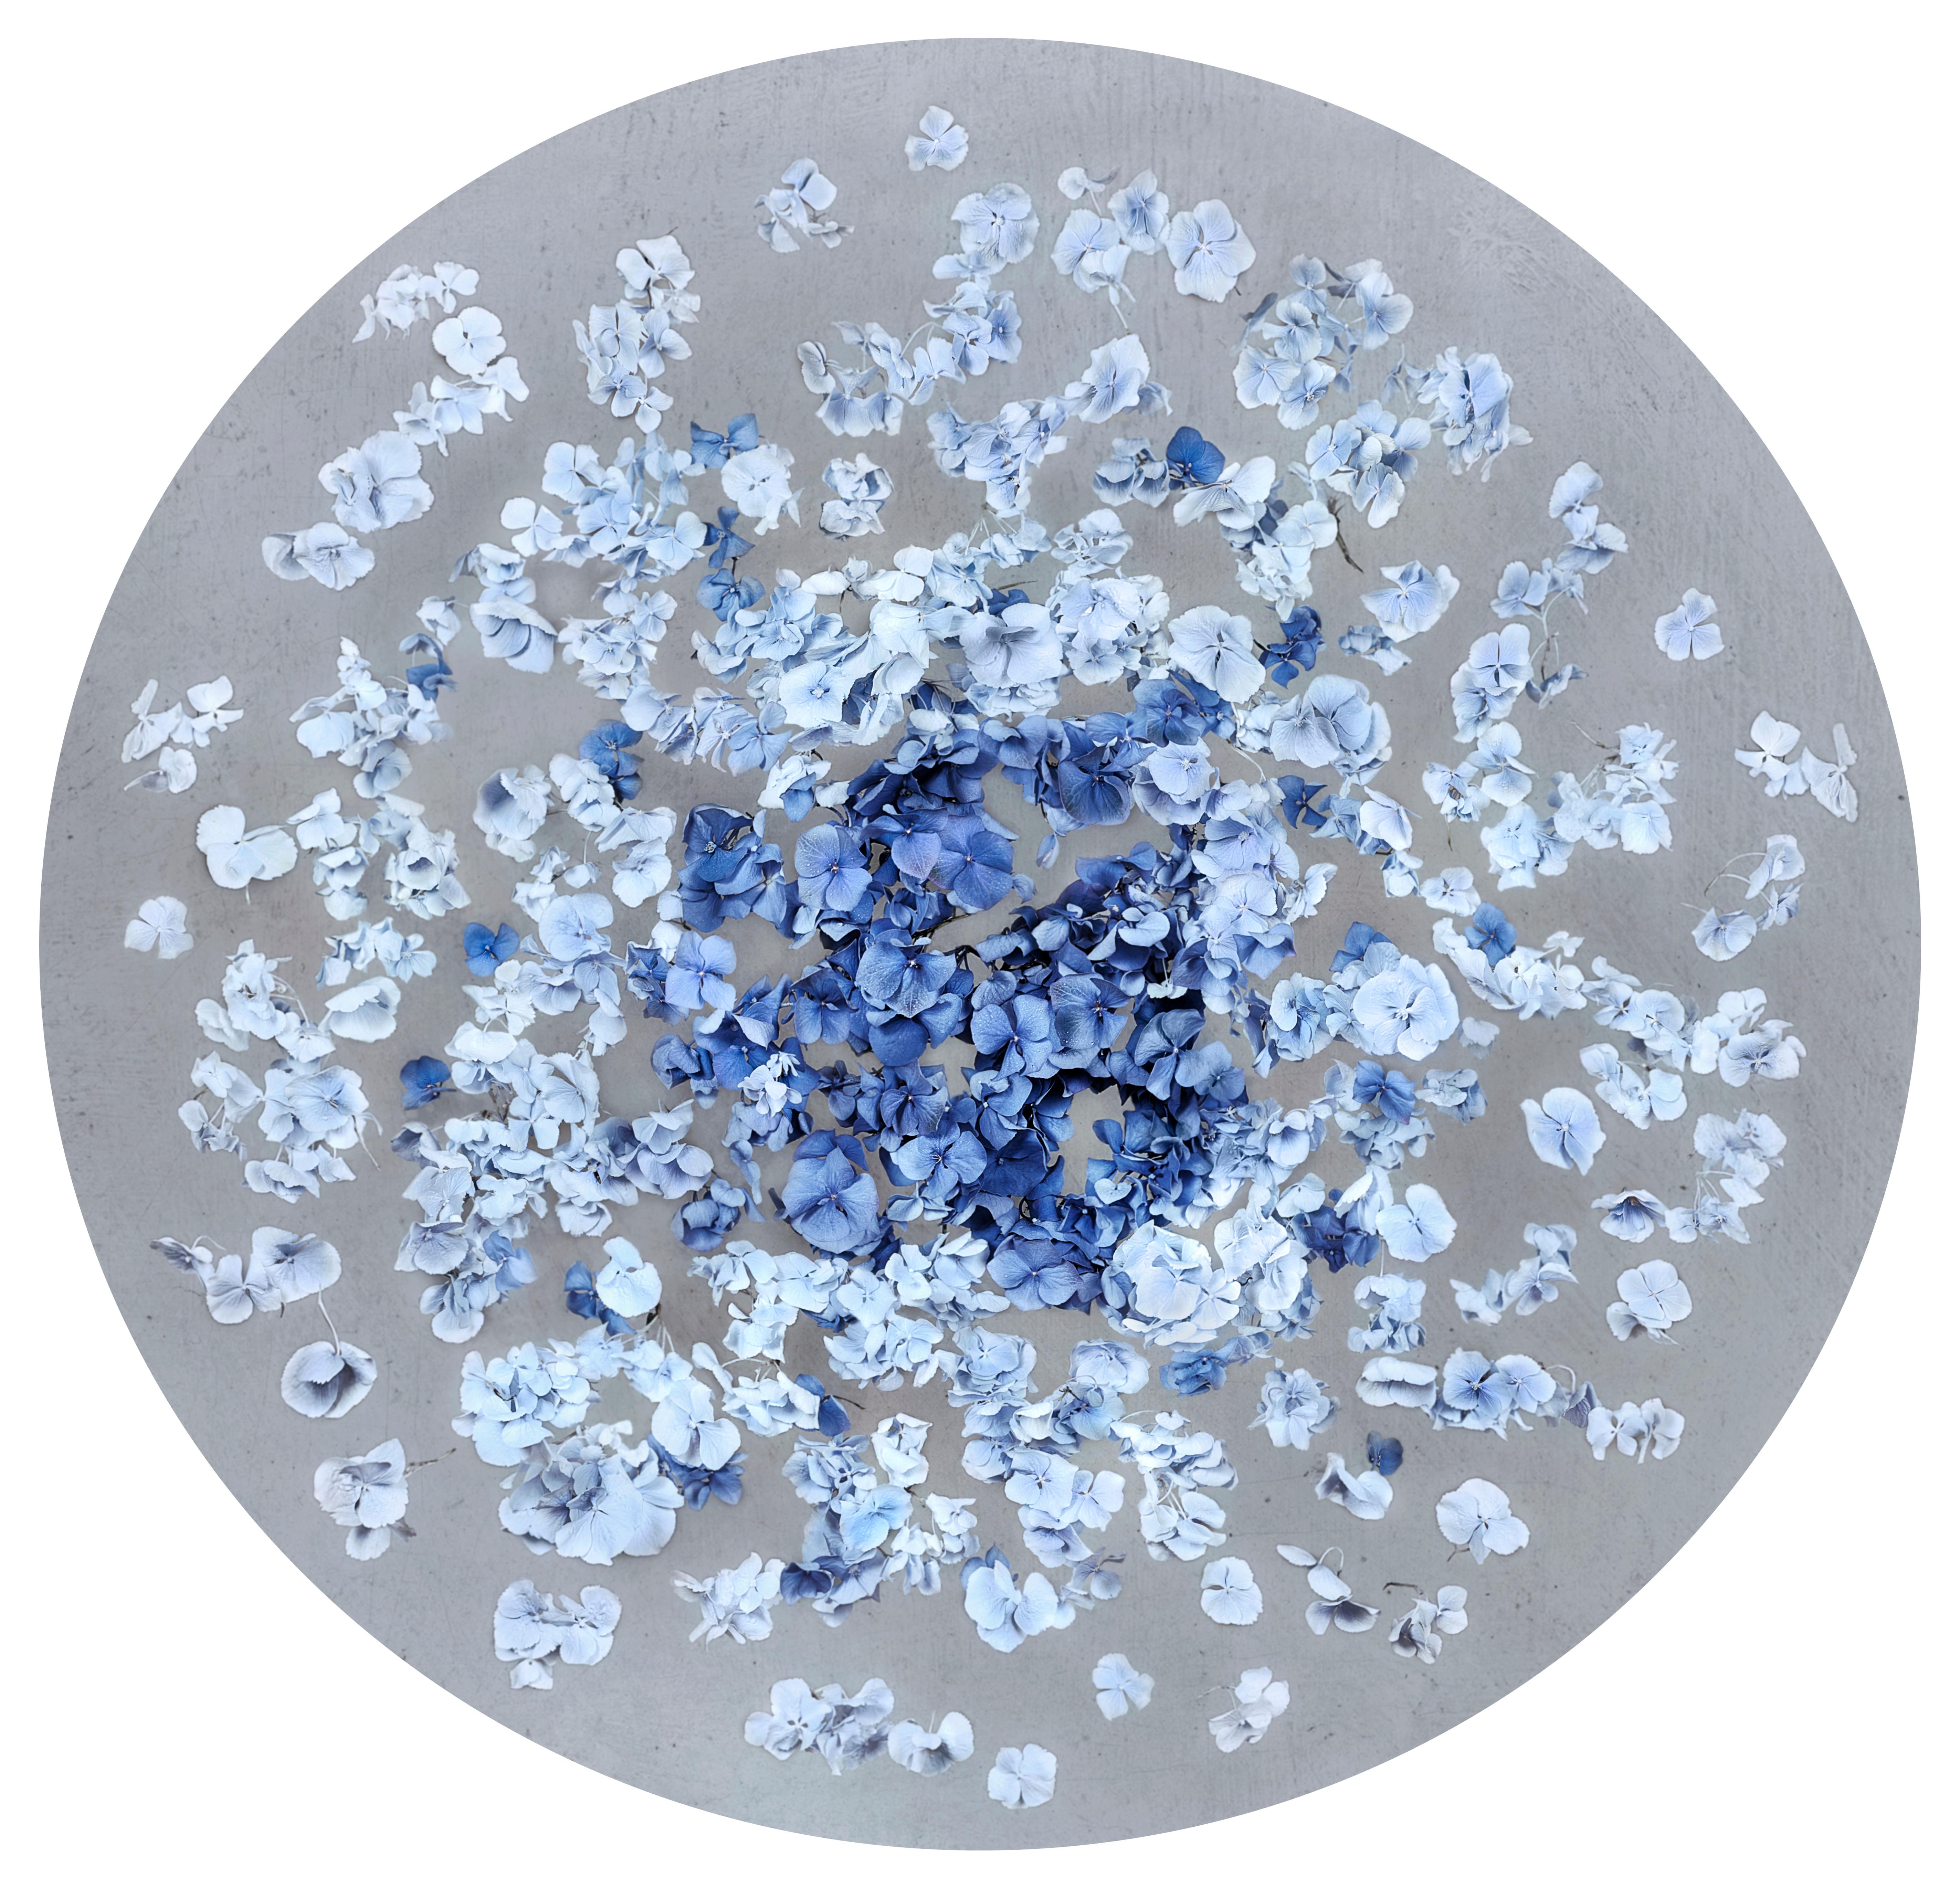 Series: Hydrangea Collection
C Print Mounted on Dibond Perspex Face
Edition of 6 + 2 AP

"In my work I am fascinated to reshape existing forms, to reinvent new shapes. Underneath the surface of the ball shape of the flower, I discovered the most